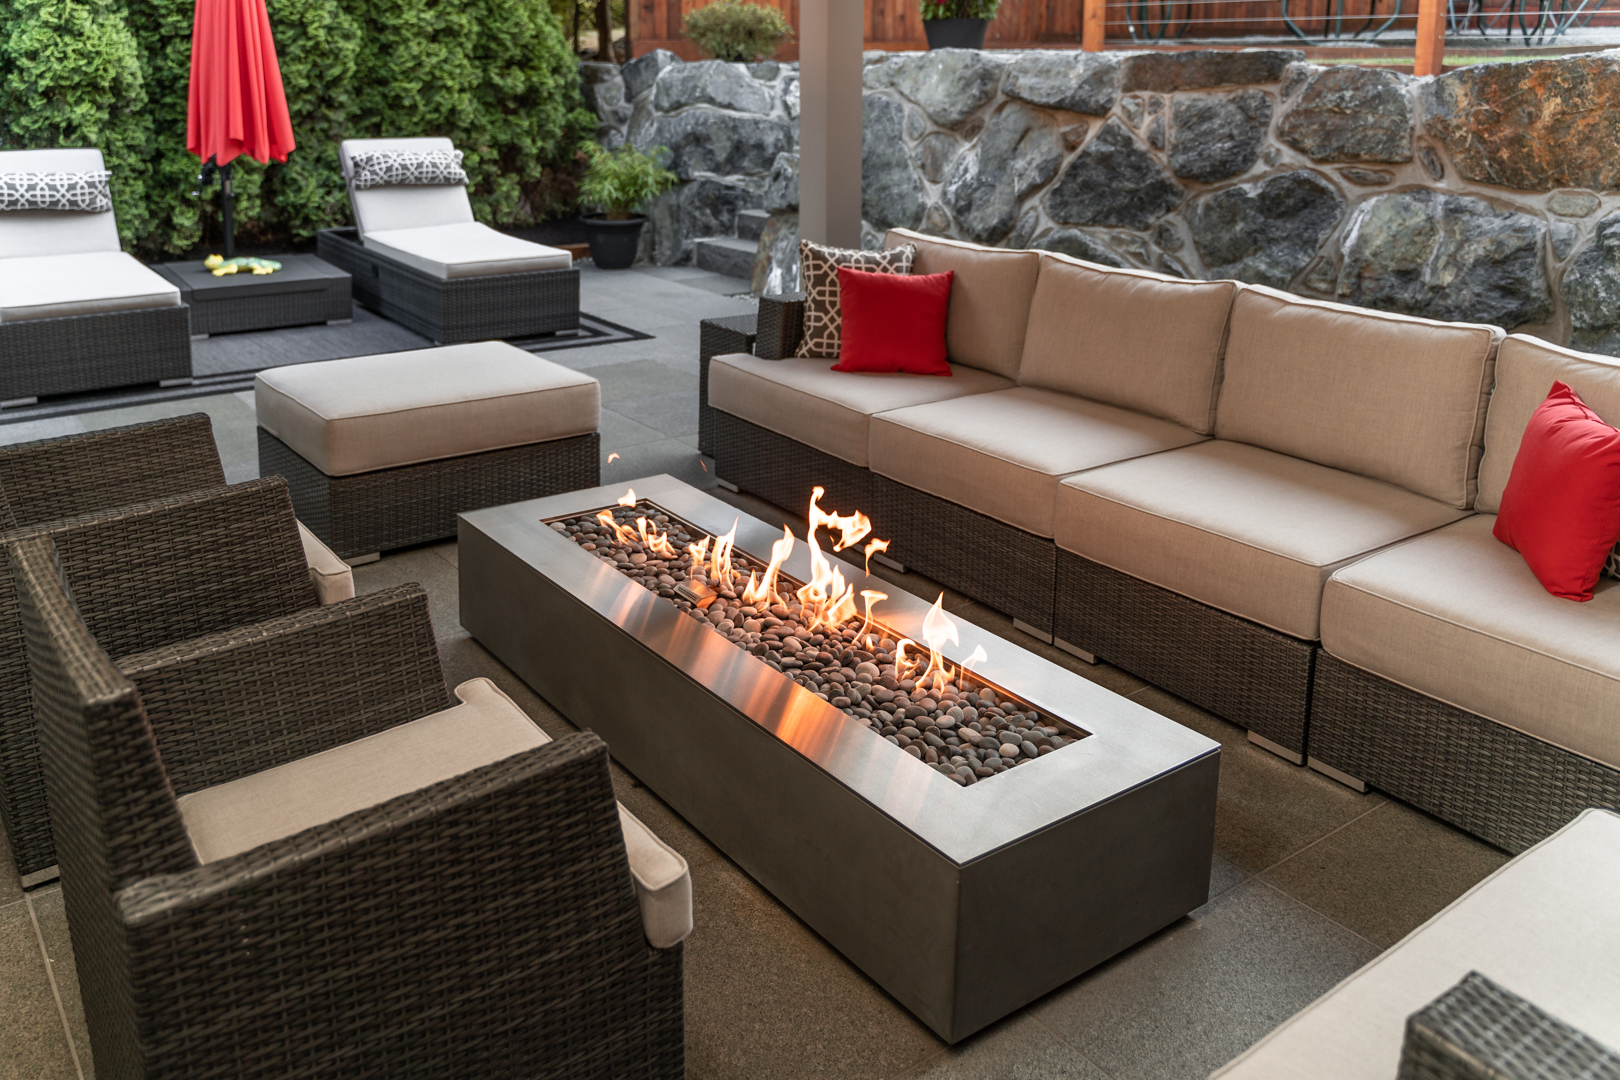 Outdoor patio with seating area and modern fire pit